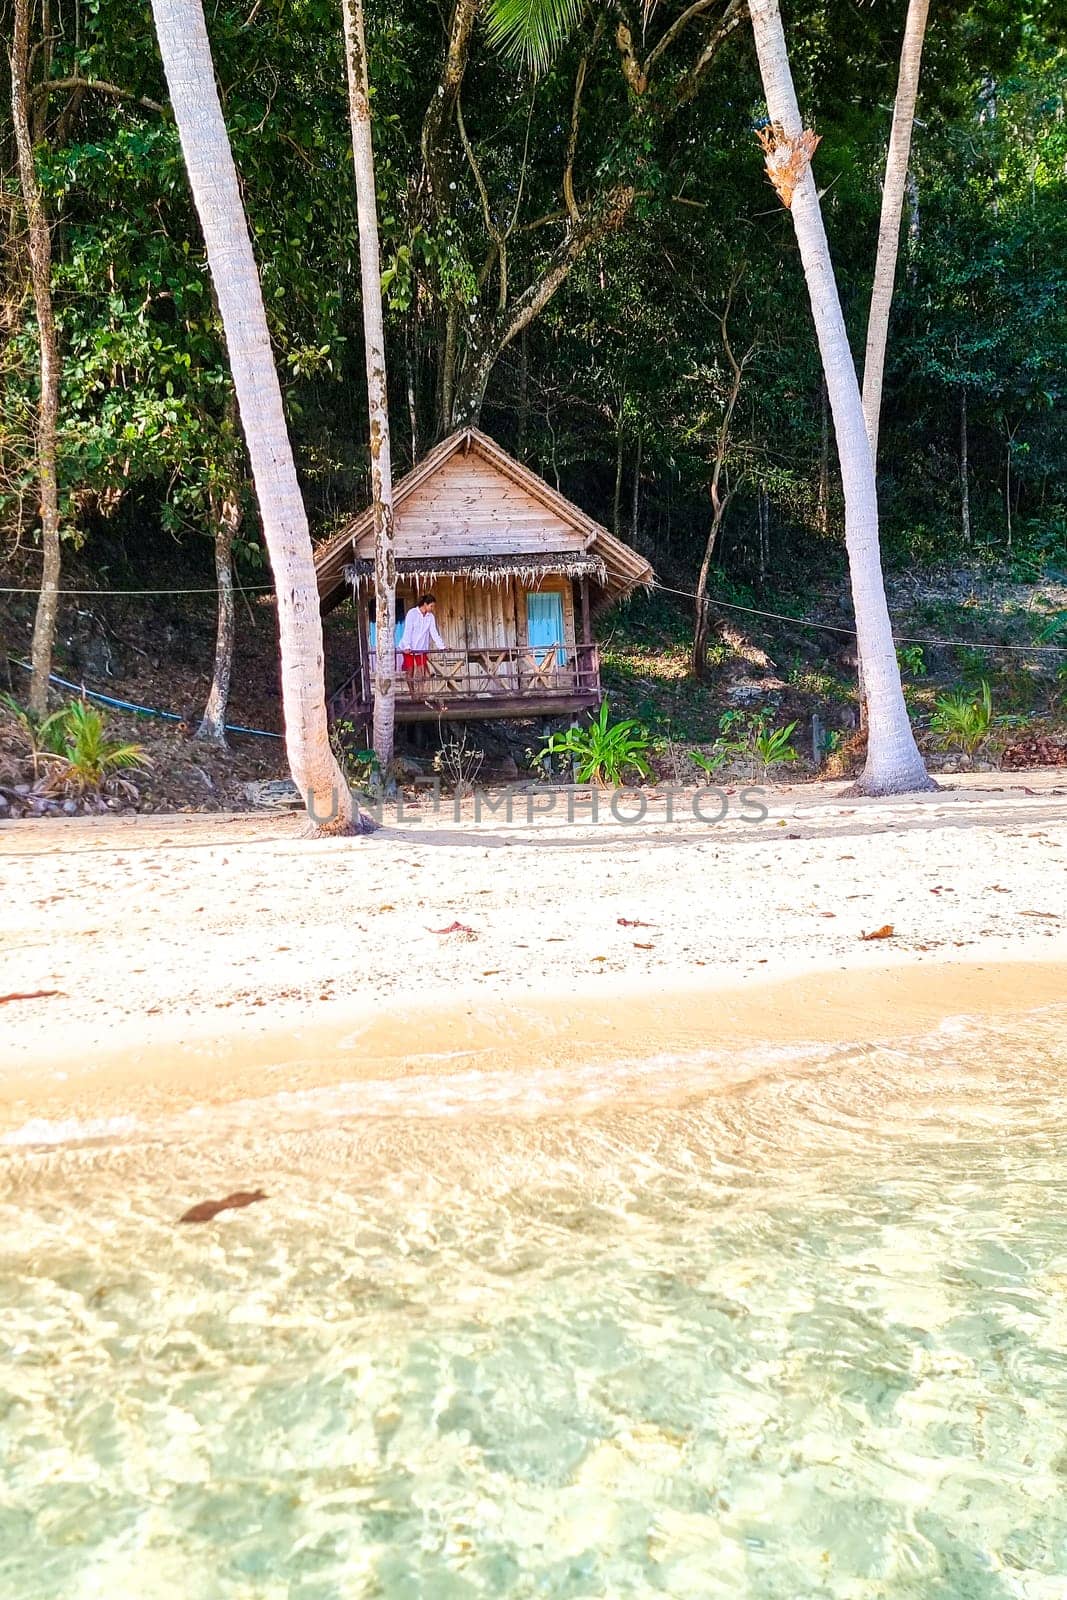 A traditional wooden hut nestled on the sandy shore of a pristine tropical beach, with lush palm trees swaying in the gentle breeze under a clear blue sky.